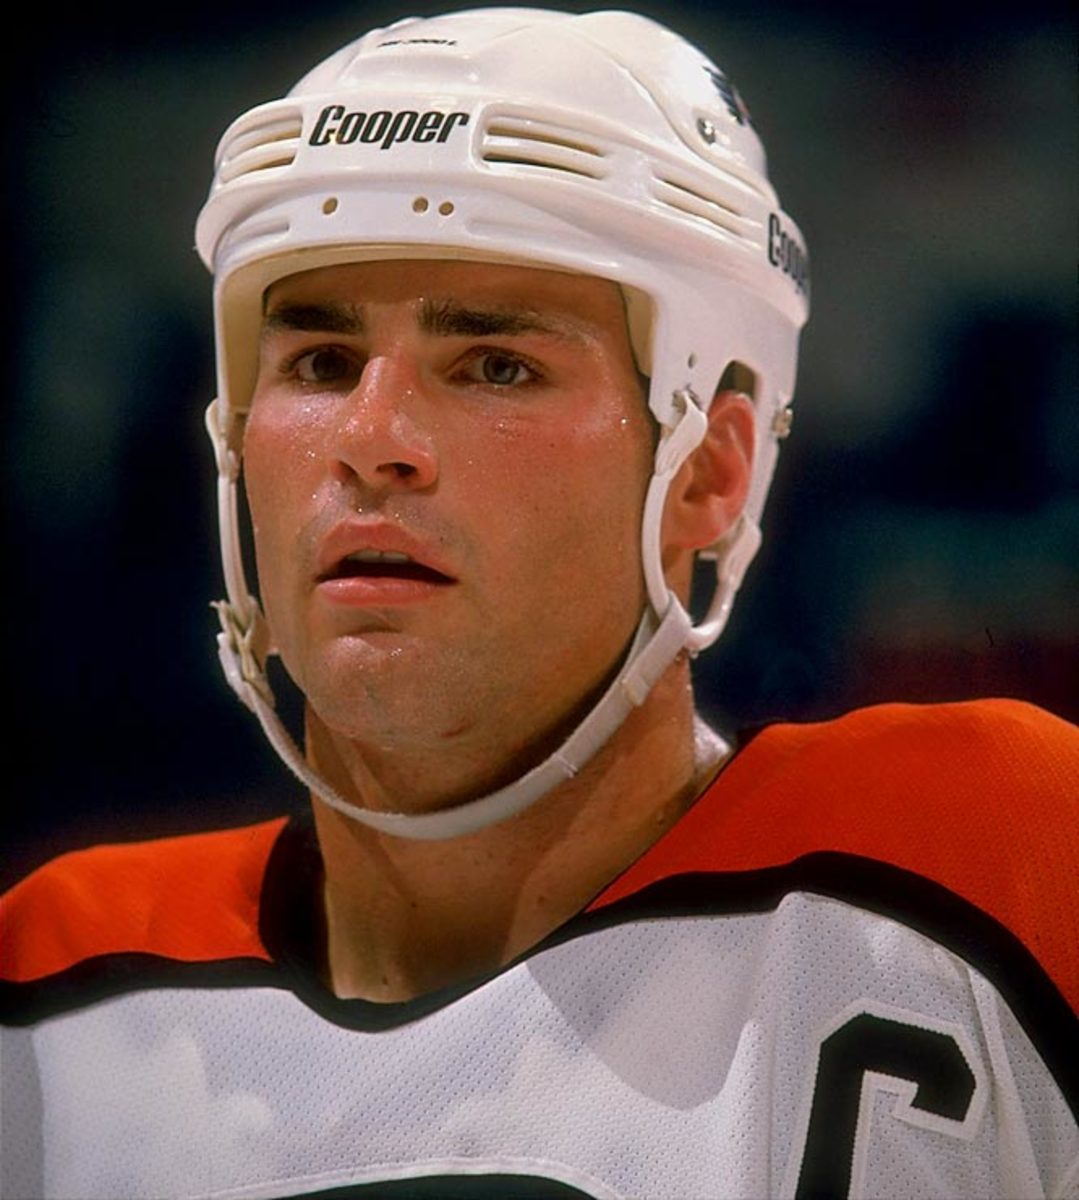 The canary in the coal mine, Eric Lindros, at long last, goes into